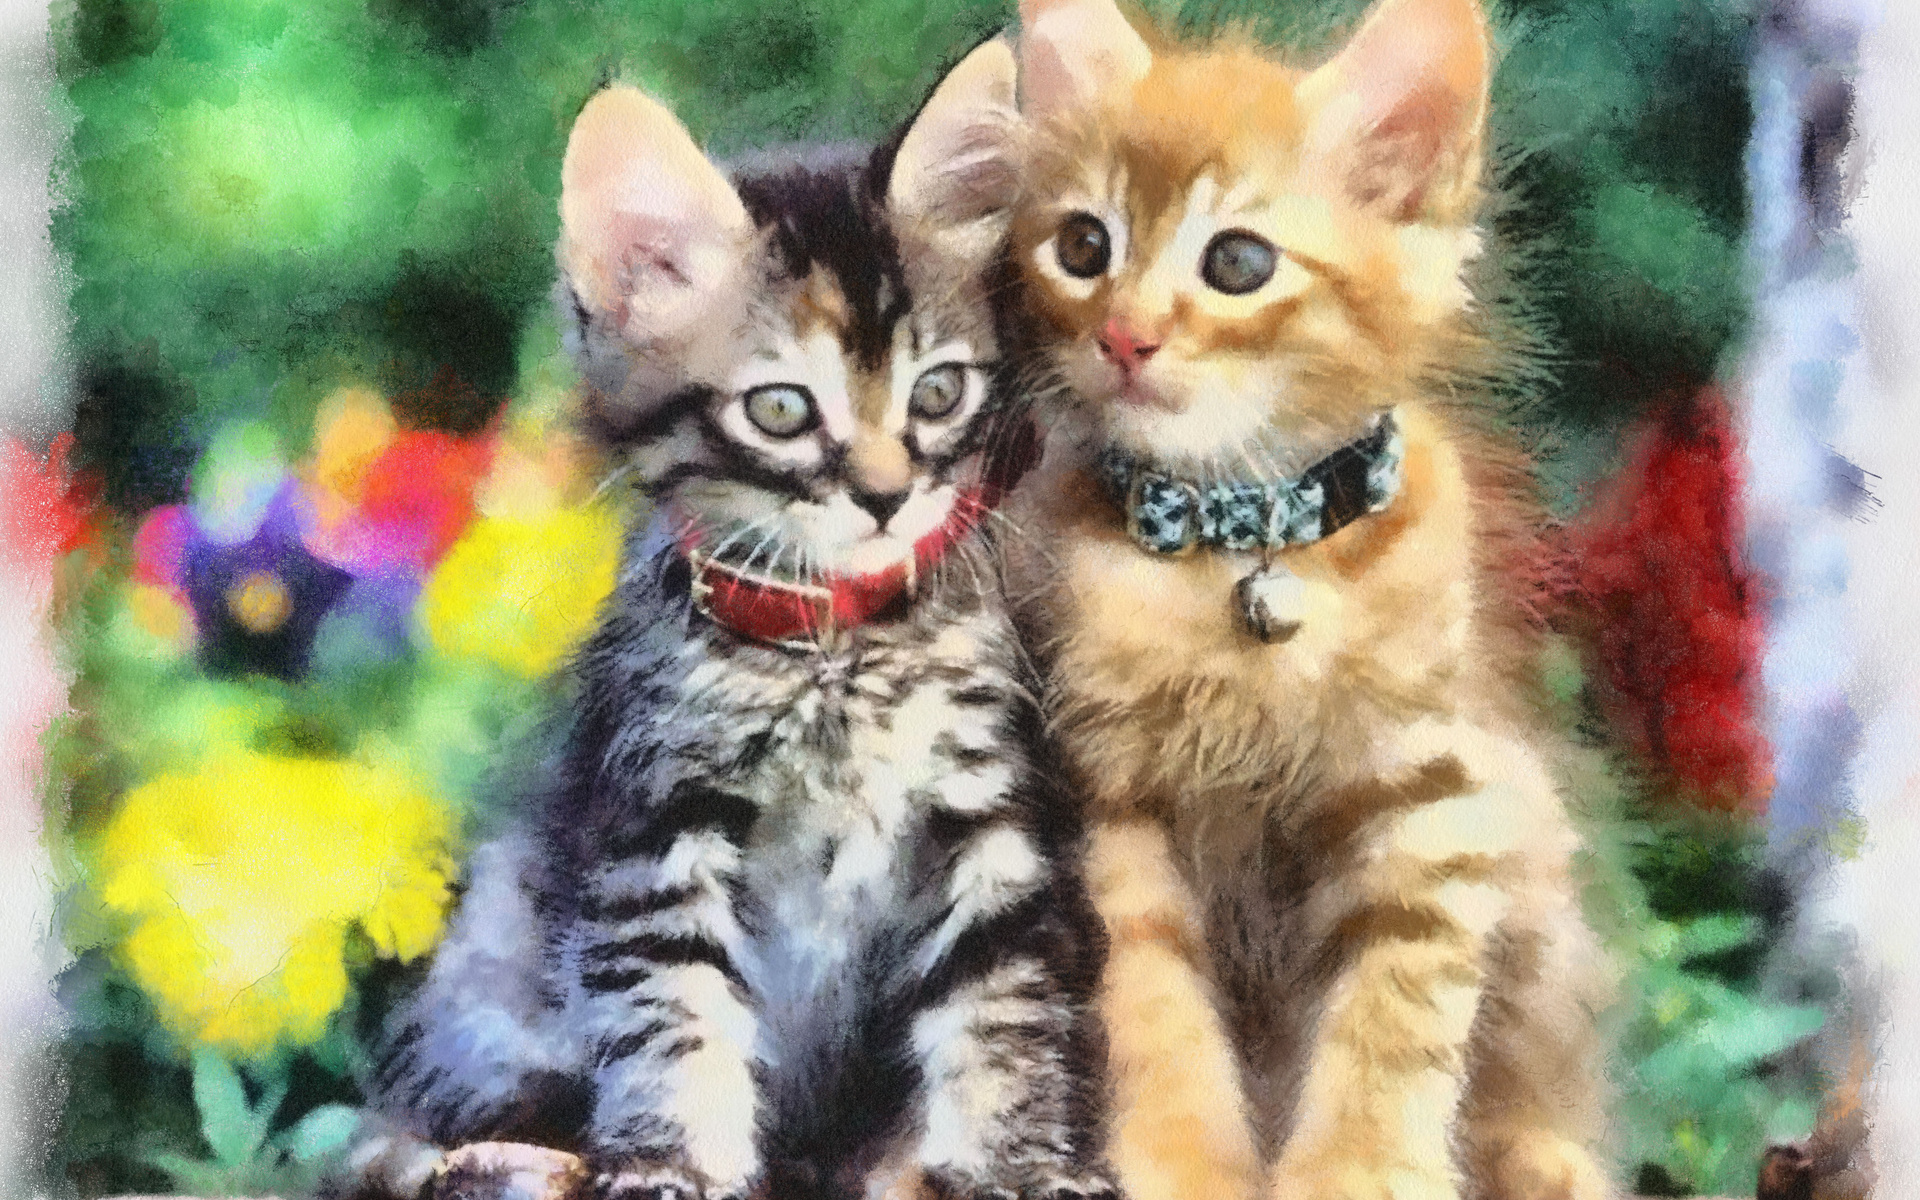 animals, Cats, Kittens, Whiskers, Fur, Face, Eyes, Nose, Collar, Jewelry, Art, Artistic, Colors, Flowers, Love, Friends, Children Wallpaper